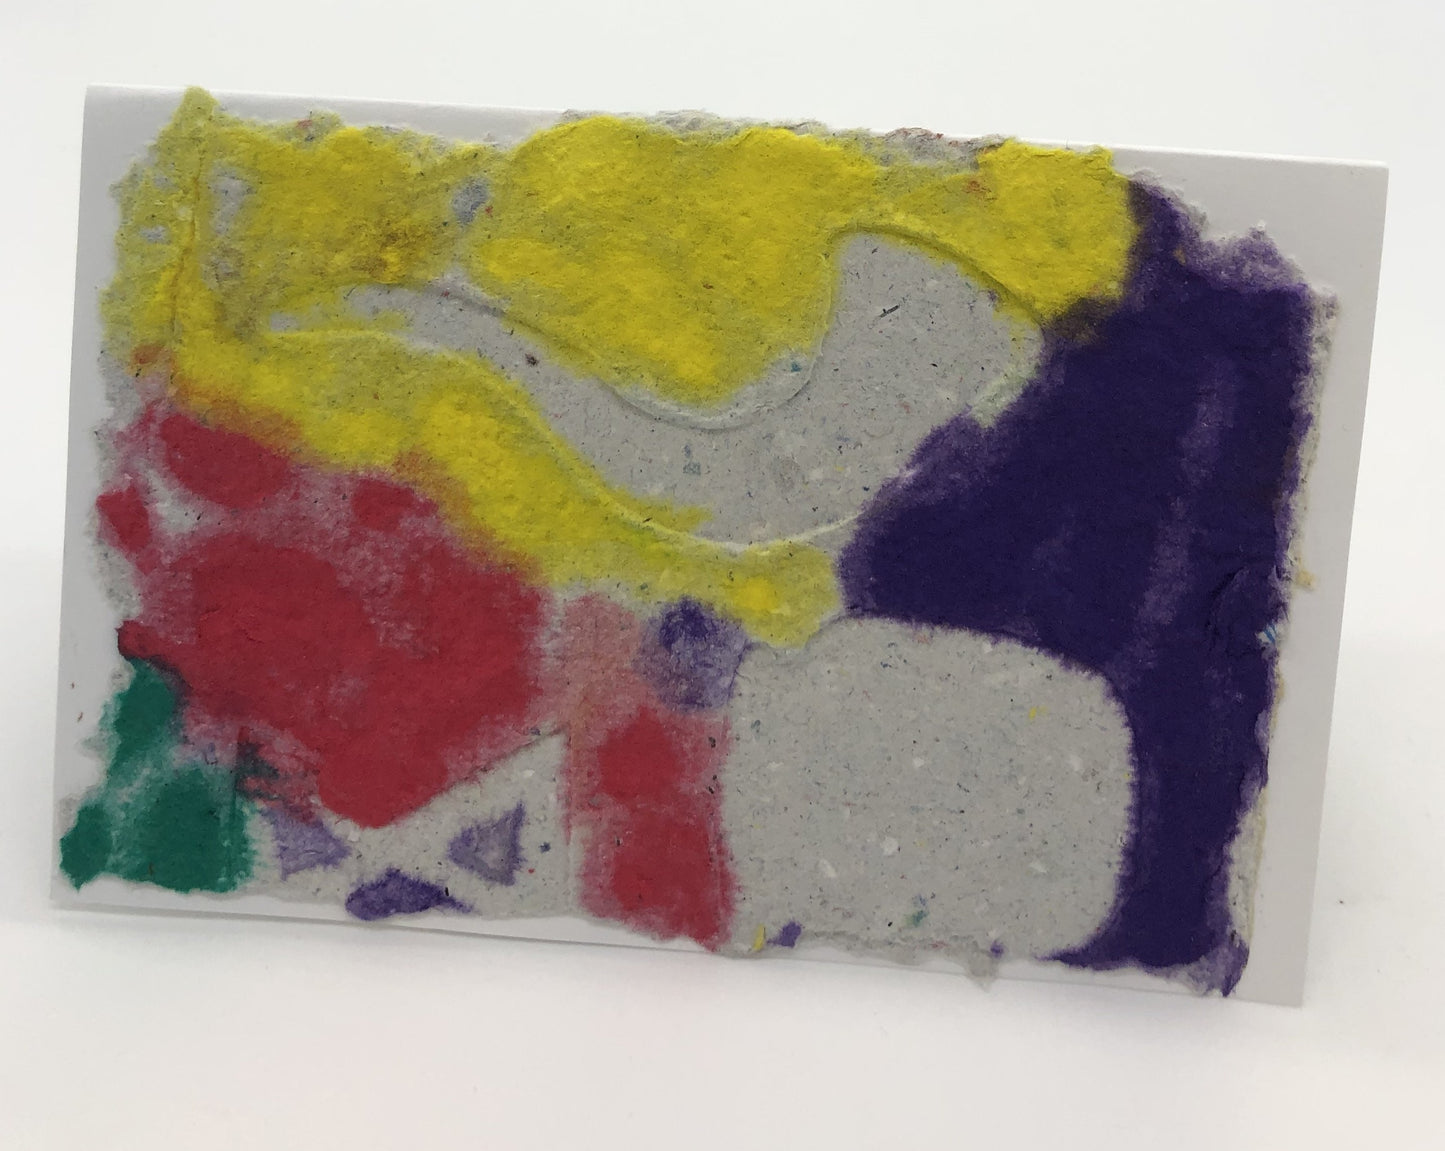 Yellow, purple, red and green background with a shofar in natural paper color on top.  There are two indistinguishable random  shapes on top also.